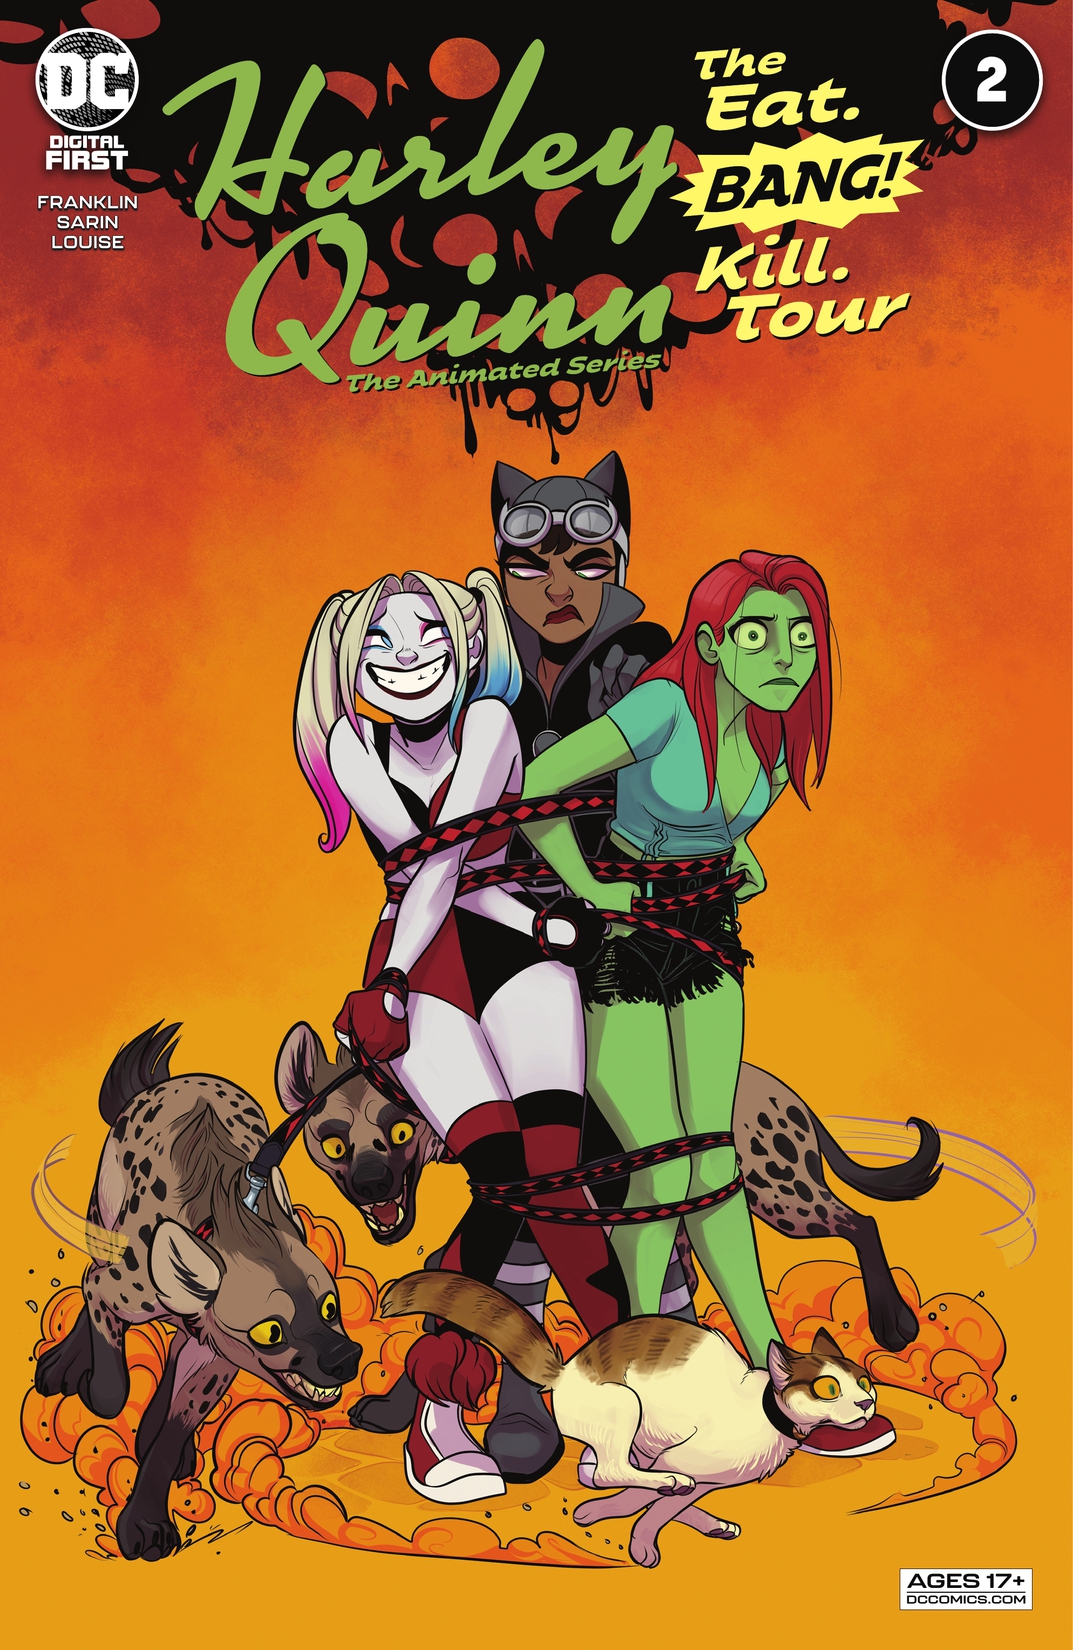 Harley Quinn: The Animated Series: The Eat. Bang! Kill. Tour #2 preview images